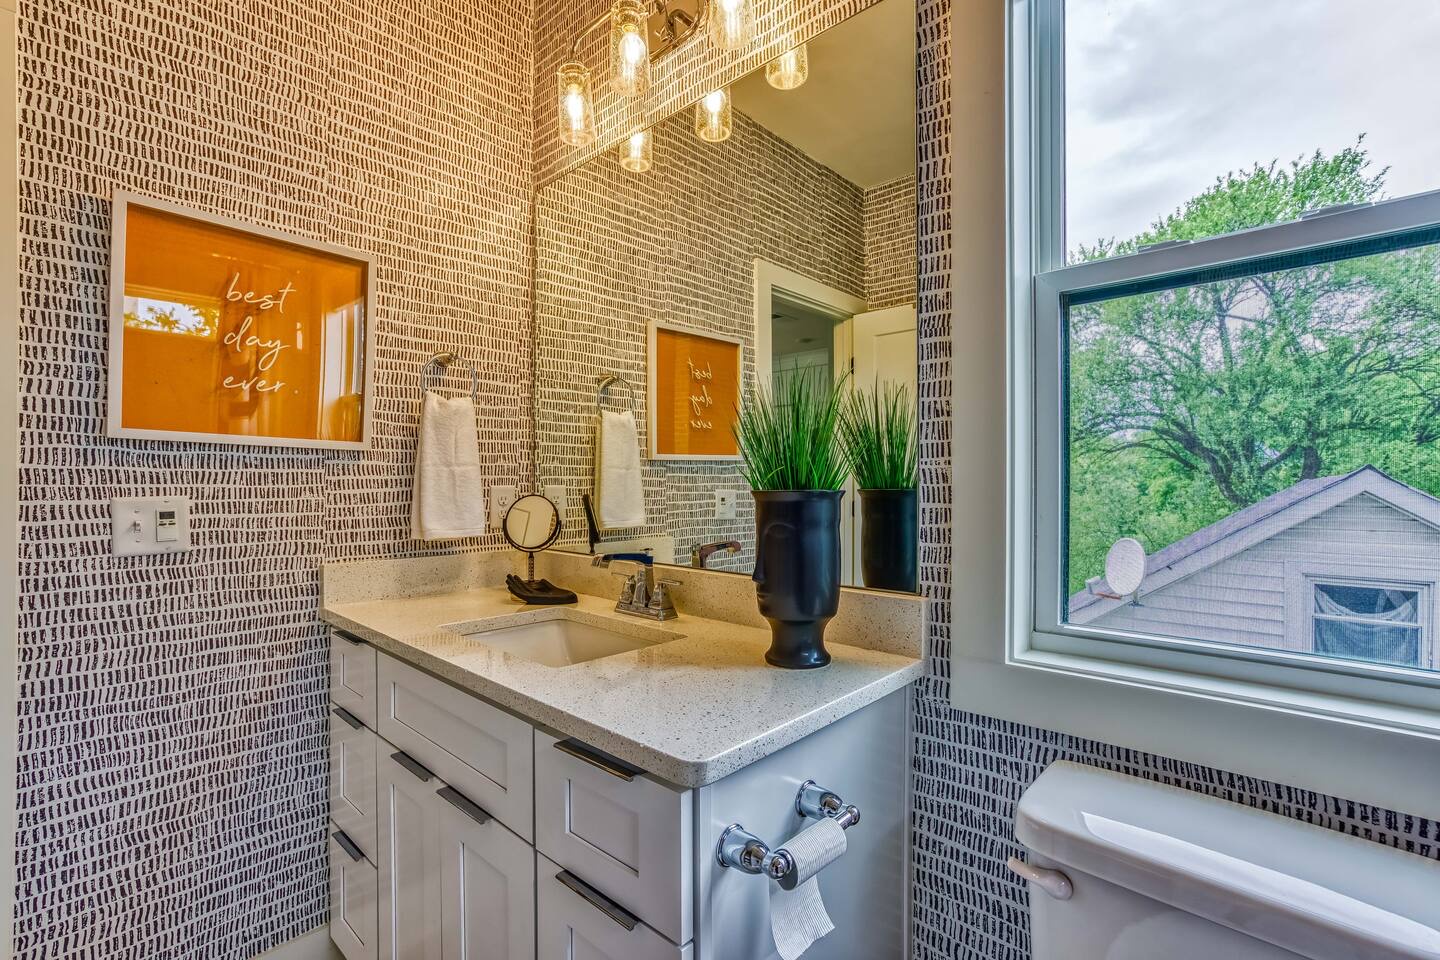 The full bath on the 2nd floor offers a large single vanity & shower/tub combo